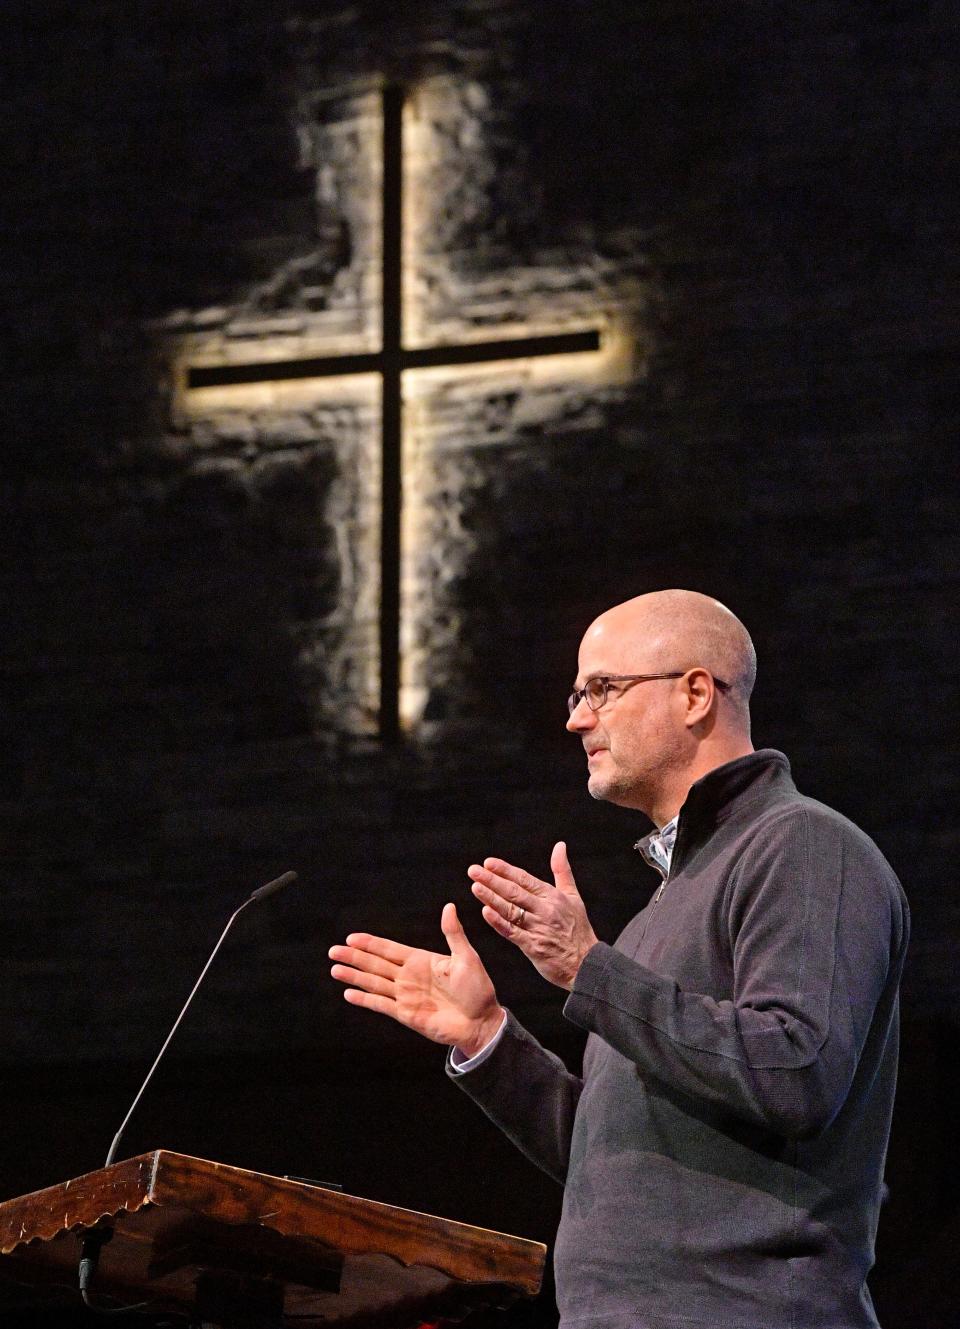 Rev. Scott Sauls, senior pastor of Christ Presbyterian Church. Sauls is currently facing disciplinary leave and suspension following an inquiry into workplace issues by the Nashville Presbytery.